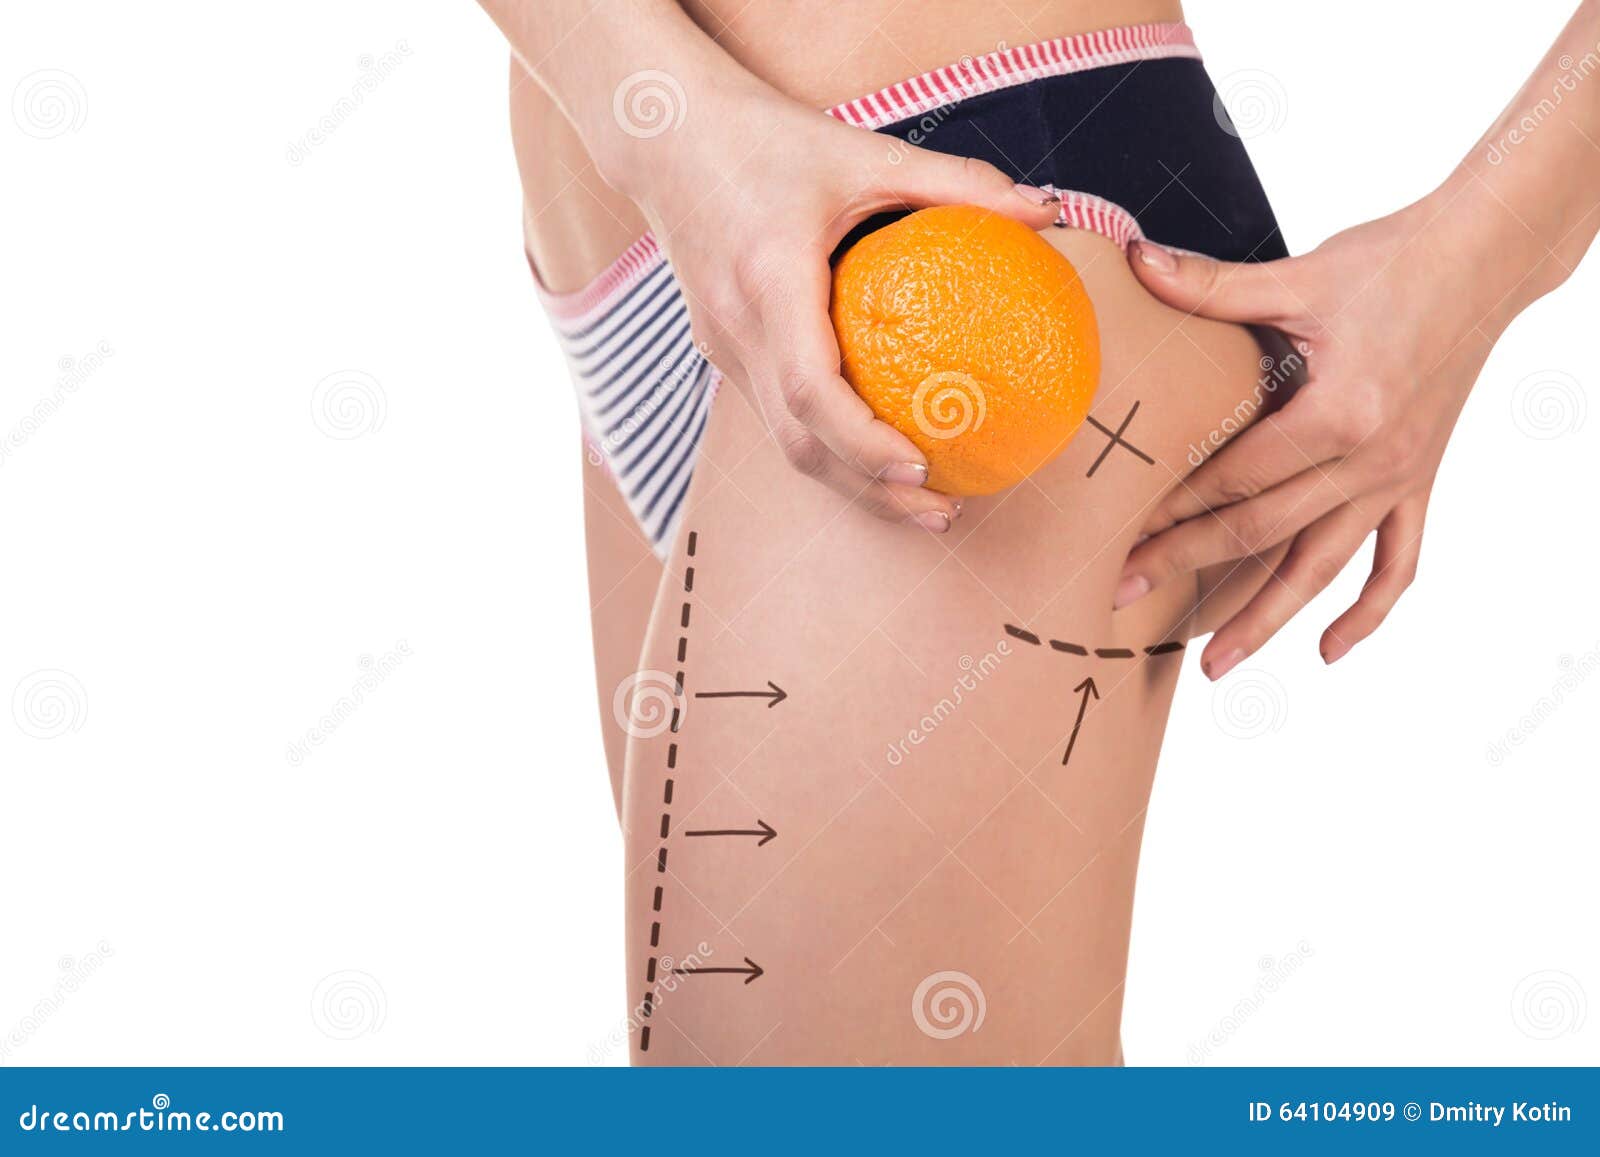 body with cellulitis and orange fruit